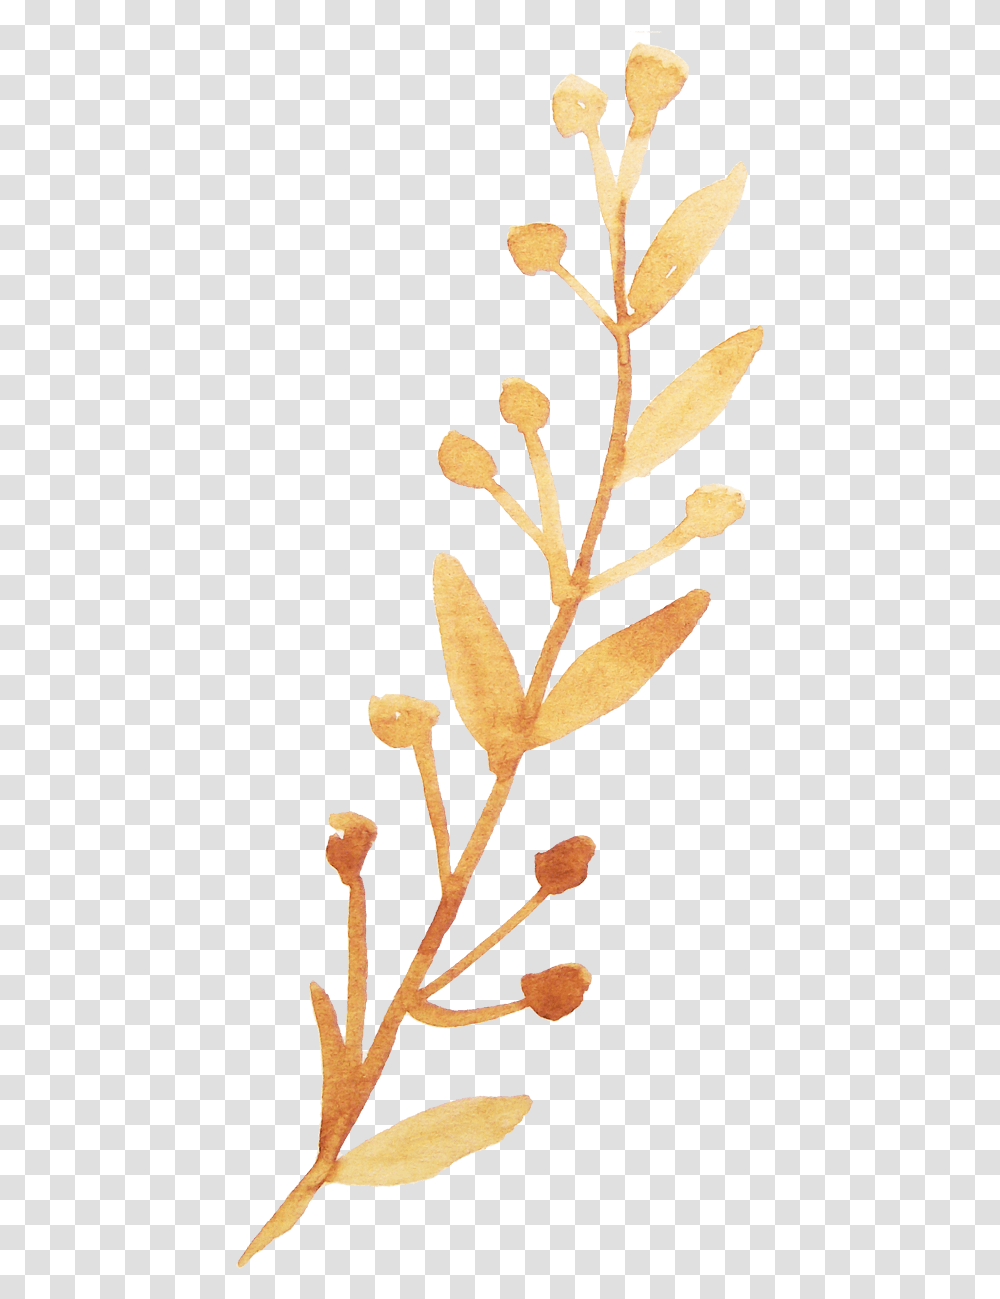 Download Hd Twig Vector Watercolor Orange Watercolor Vector, Plant, Flower, Blossom, Acanthaceae Transparent Png